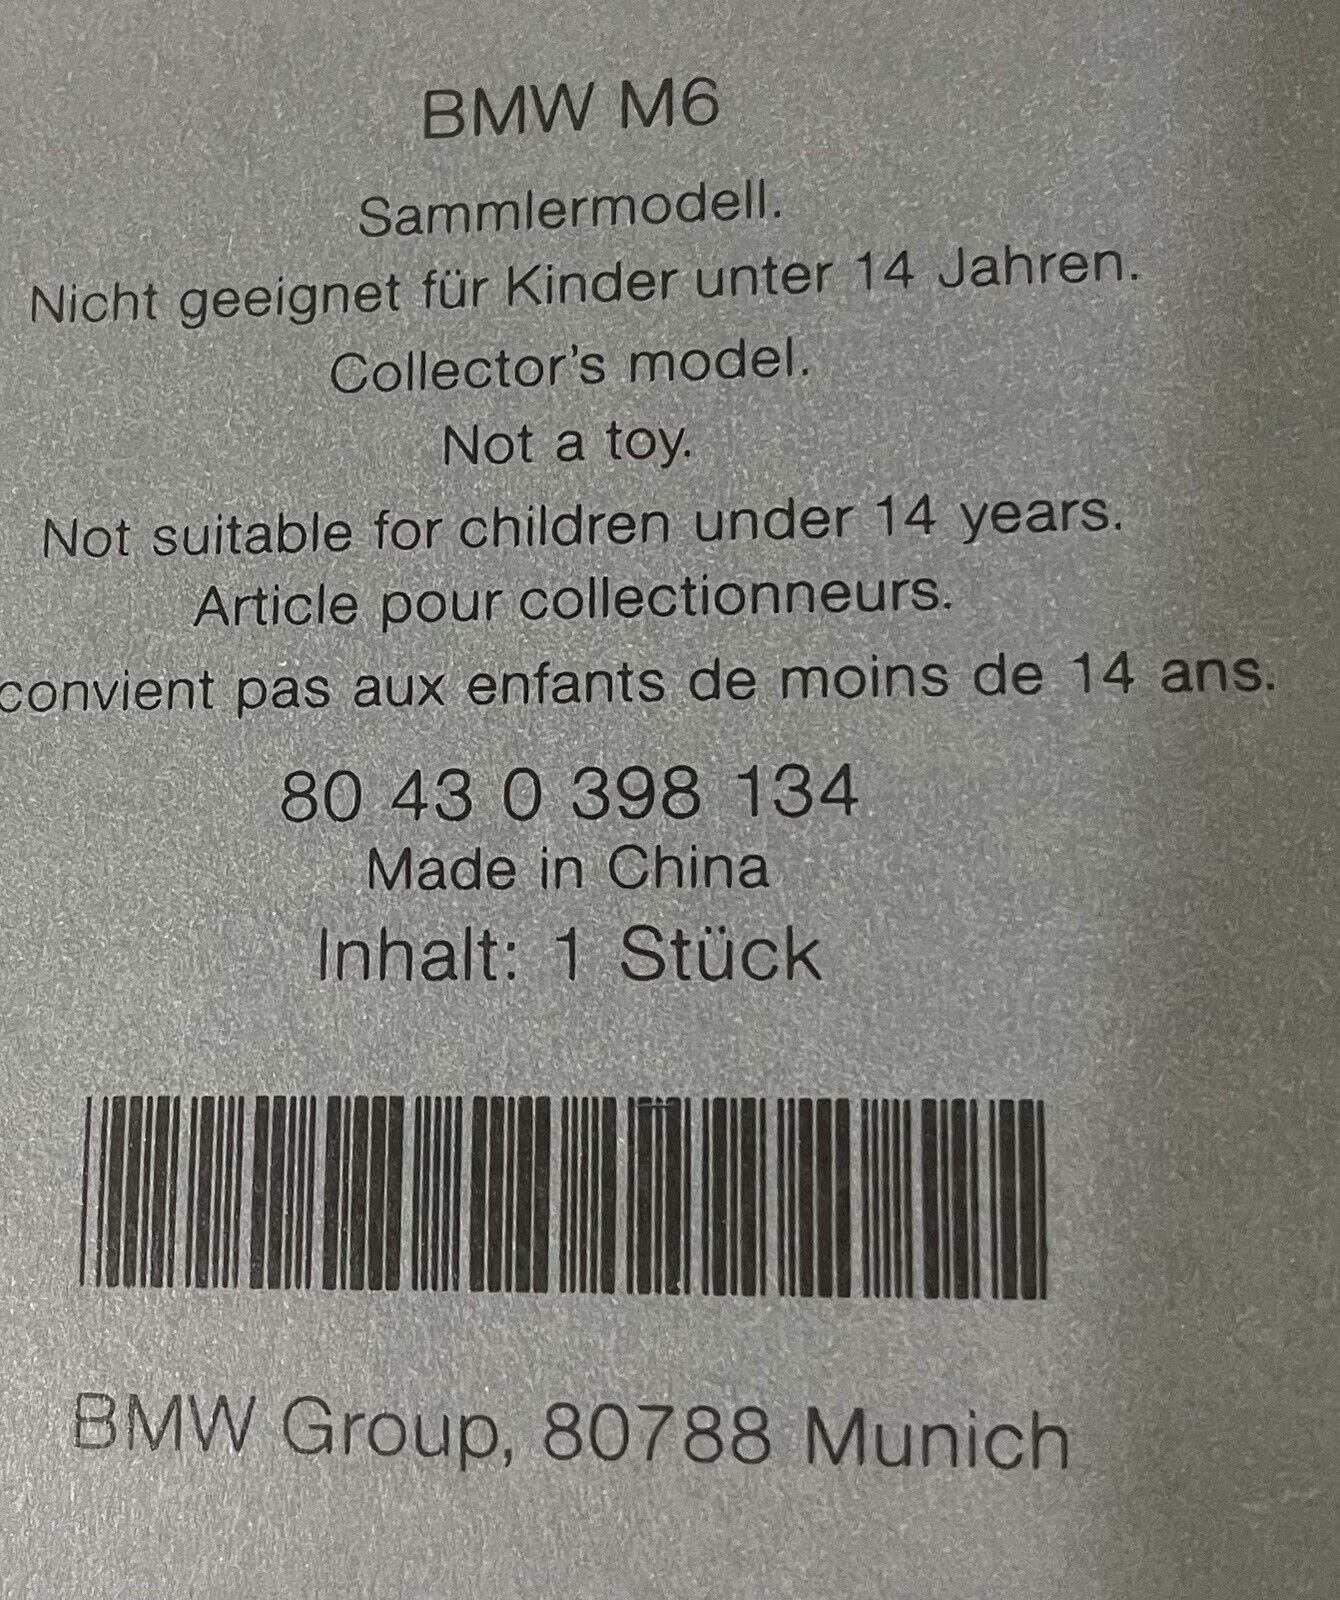 Kyosho BMW M6 Dealer Edition-80430398134 1:18, New Opened Box, Great Detail